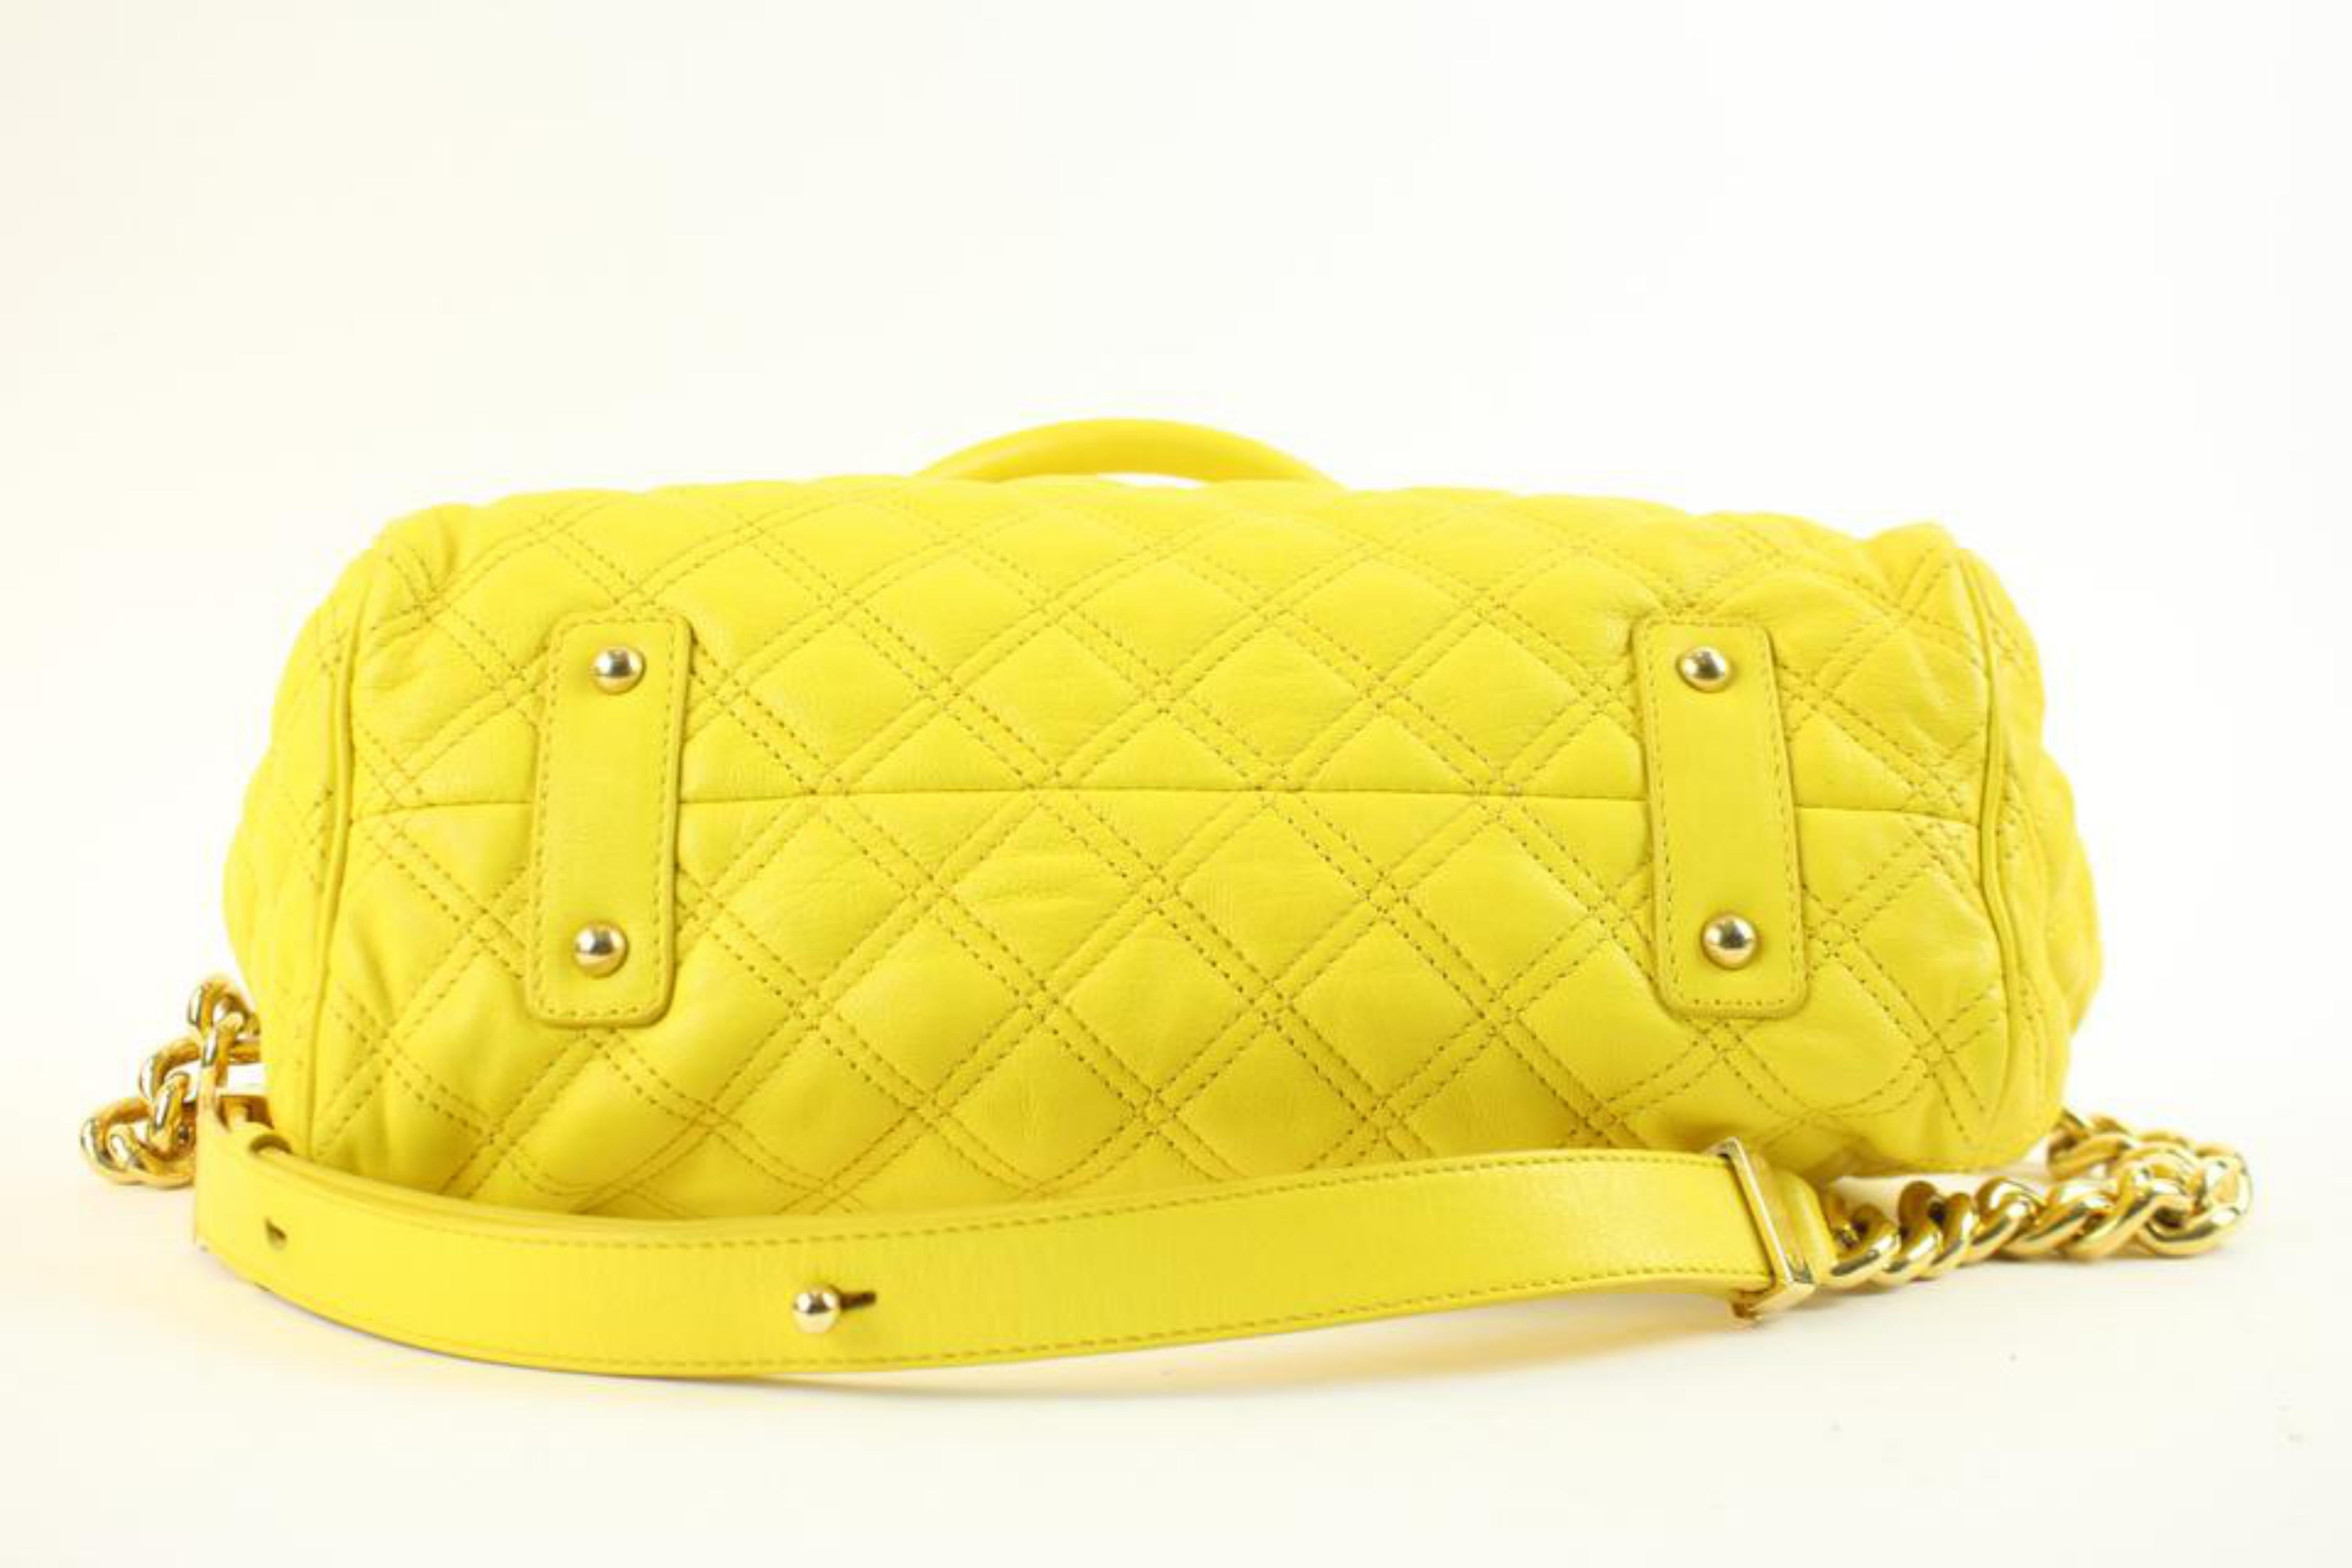 Marc Jacobs Quilted Stam 140mja1025 Yellow Shoulder Bag For Sale 4